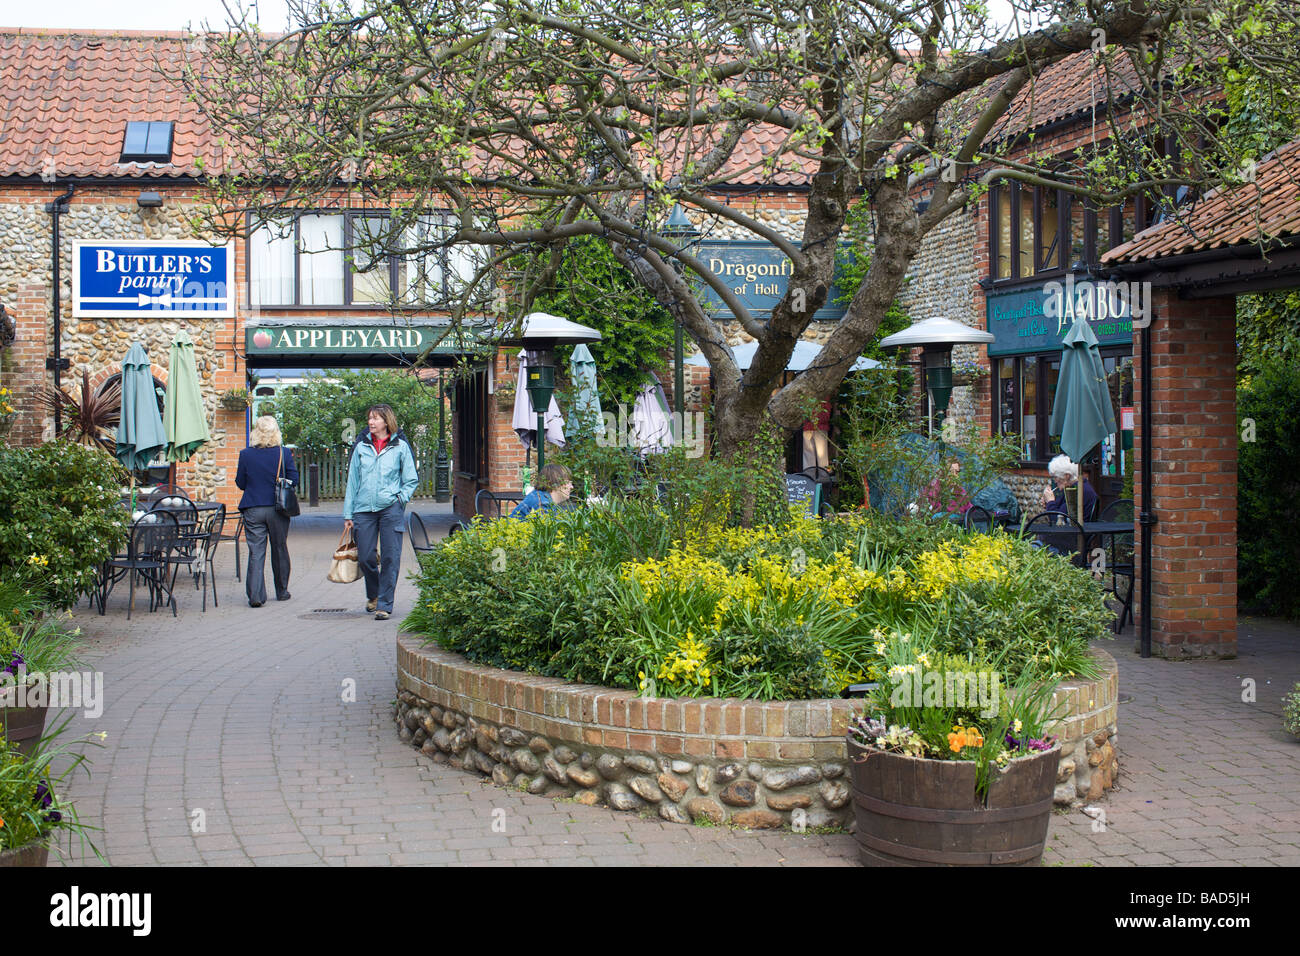 Appleyard shopping complex at Holt in Norfolk Stock Photo